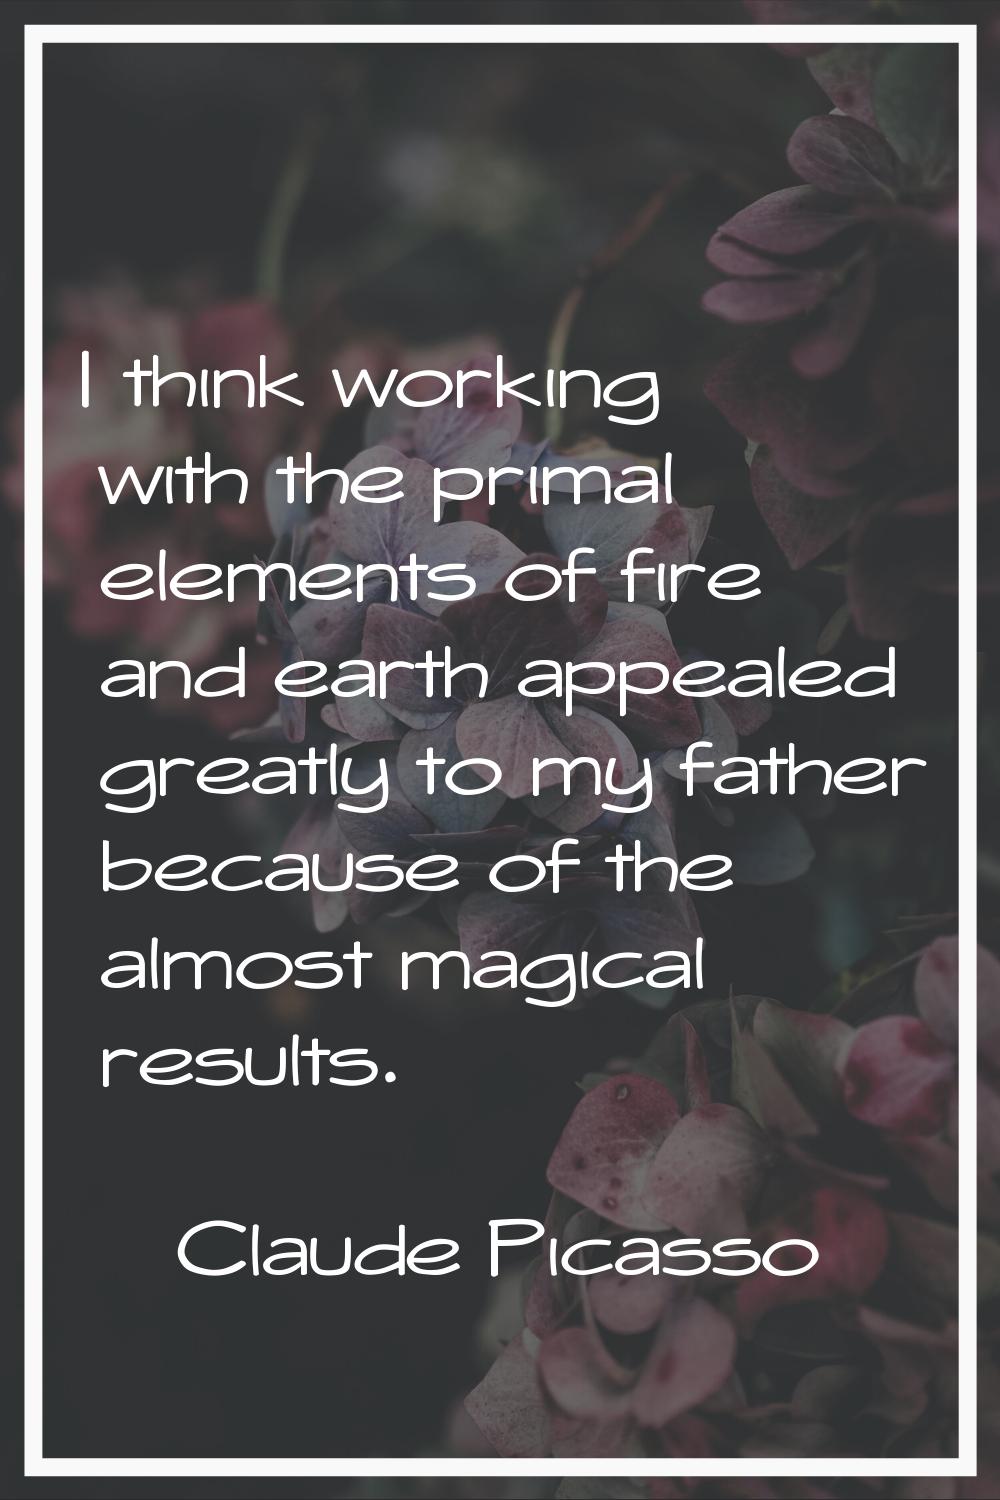 I think working with the primal elements of fire and earth appealed greatly to my father because of